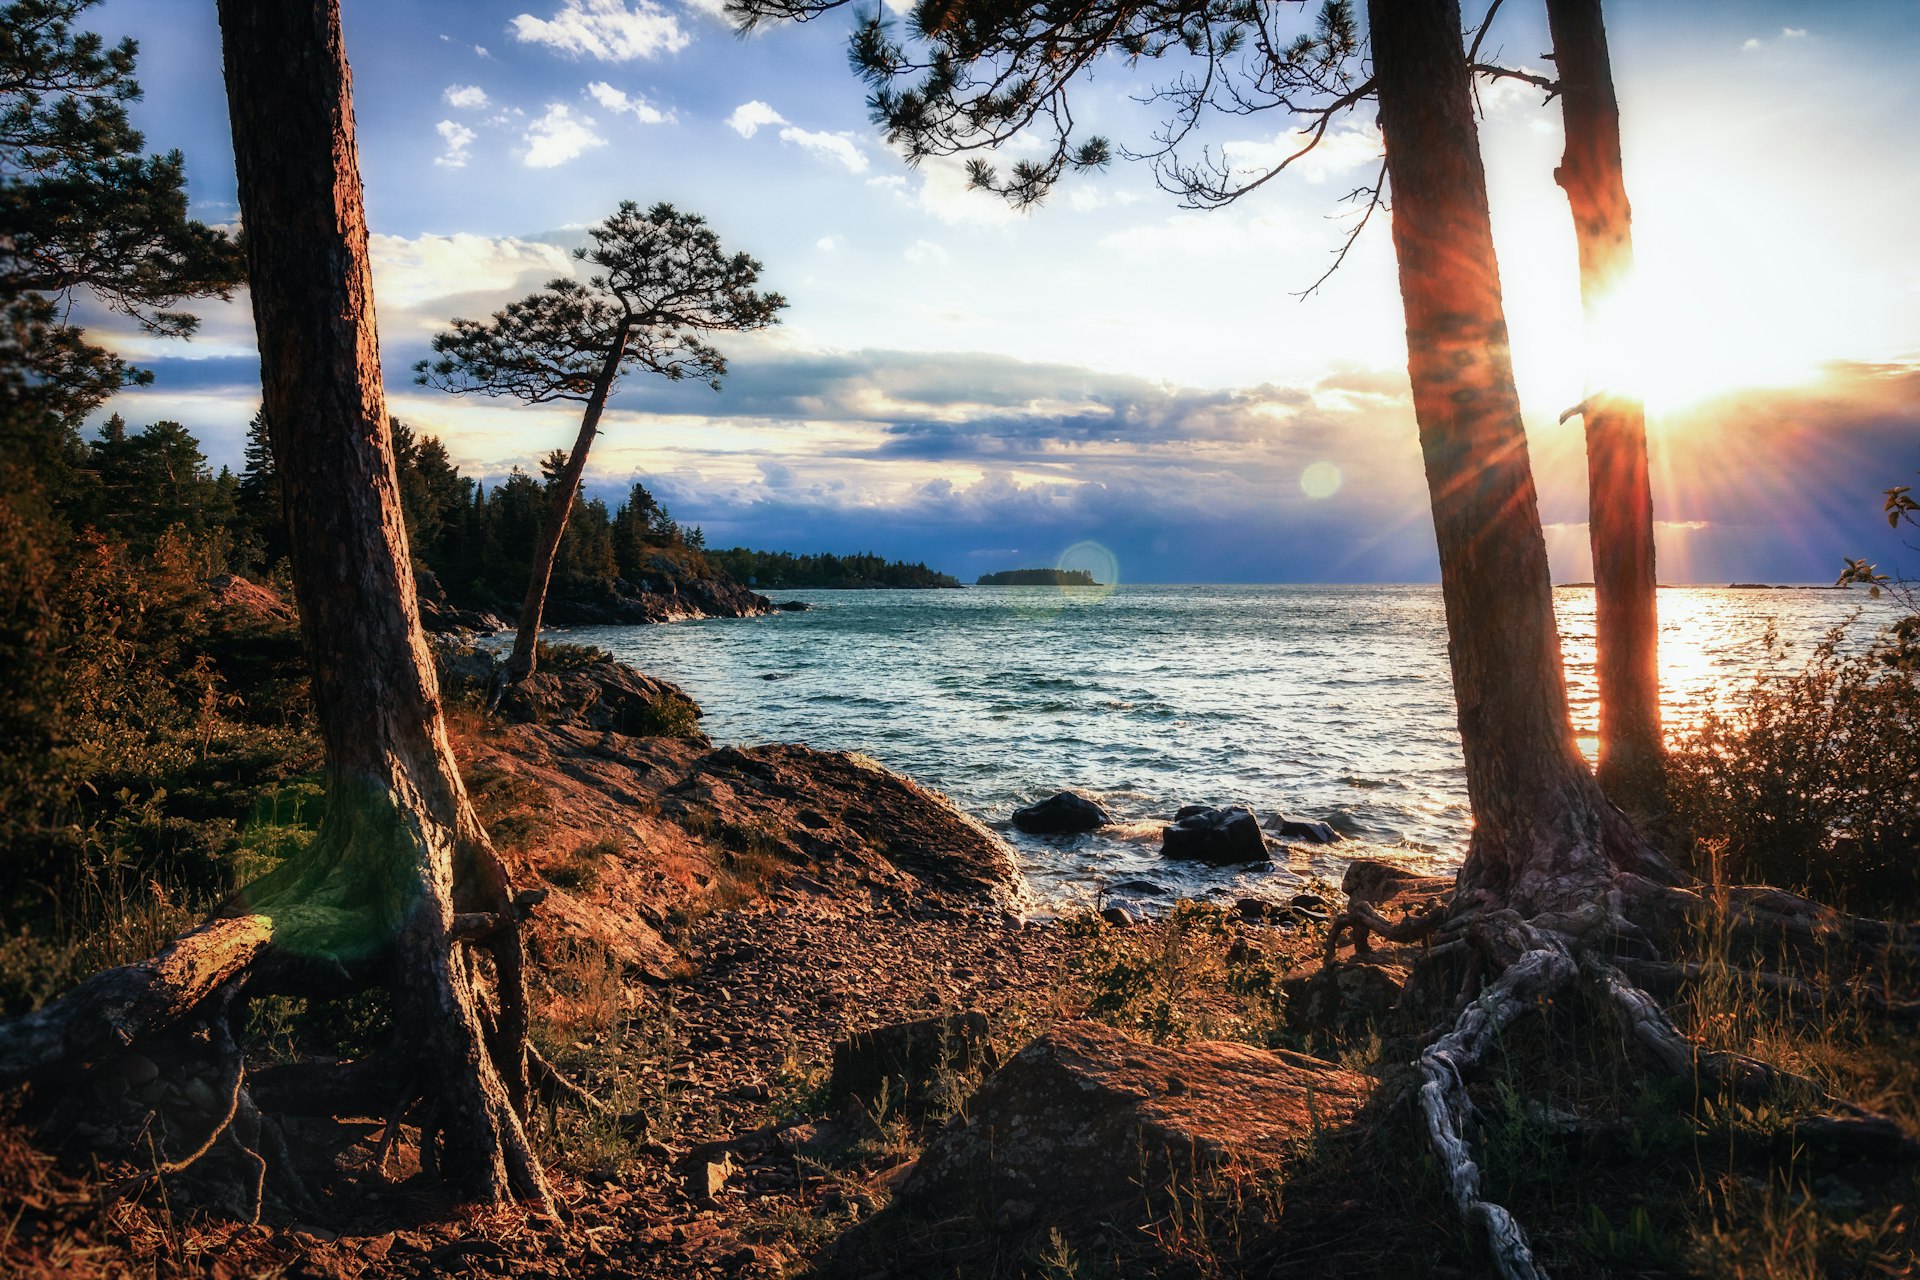 A rocky shoreline of a lake viewed from woodland as the sun sets